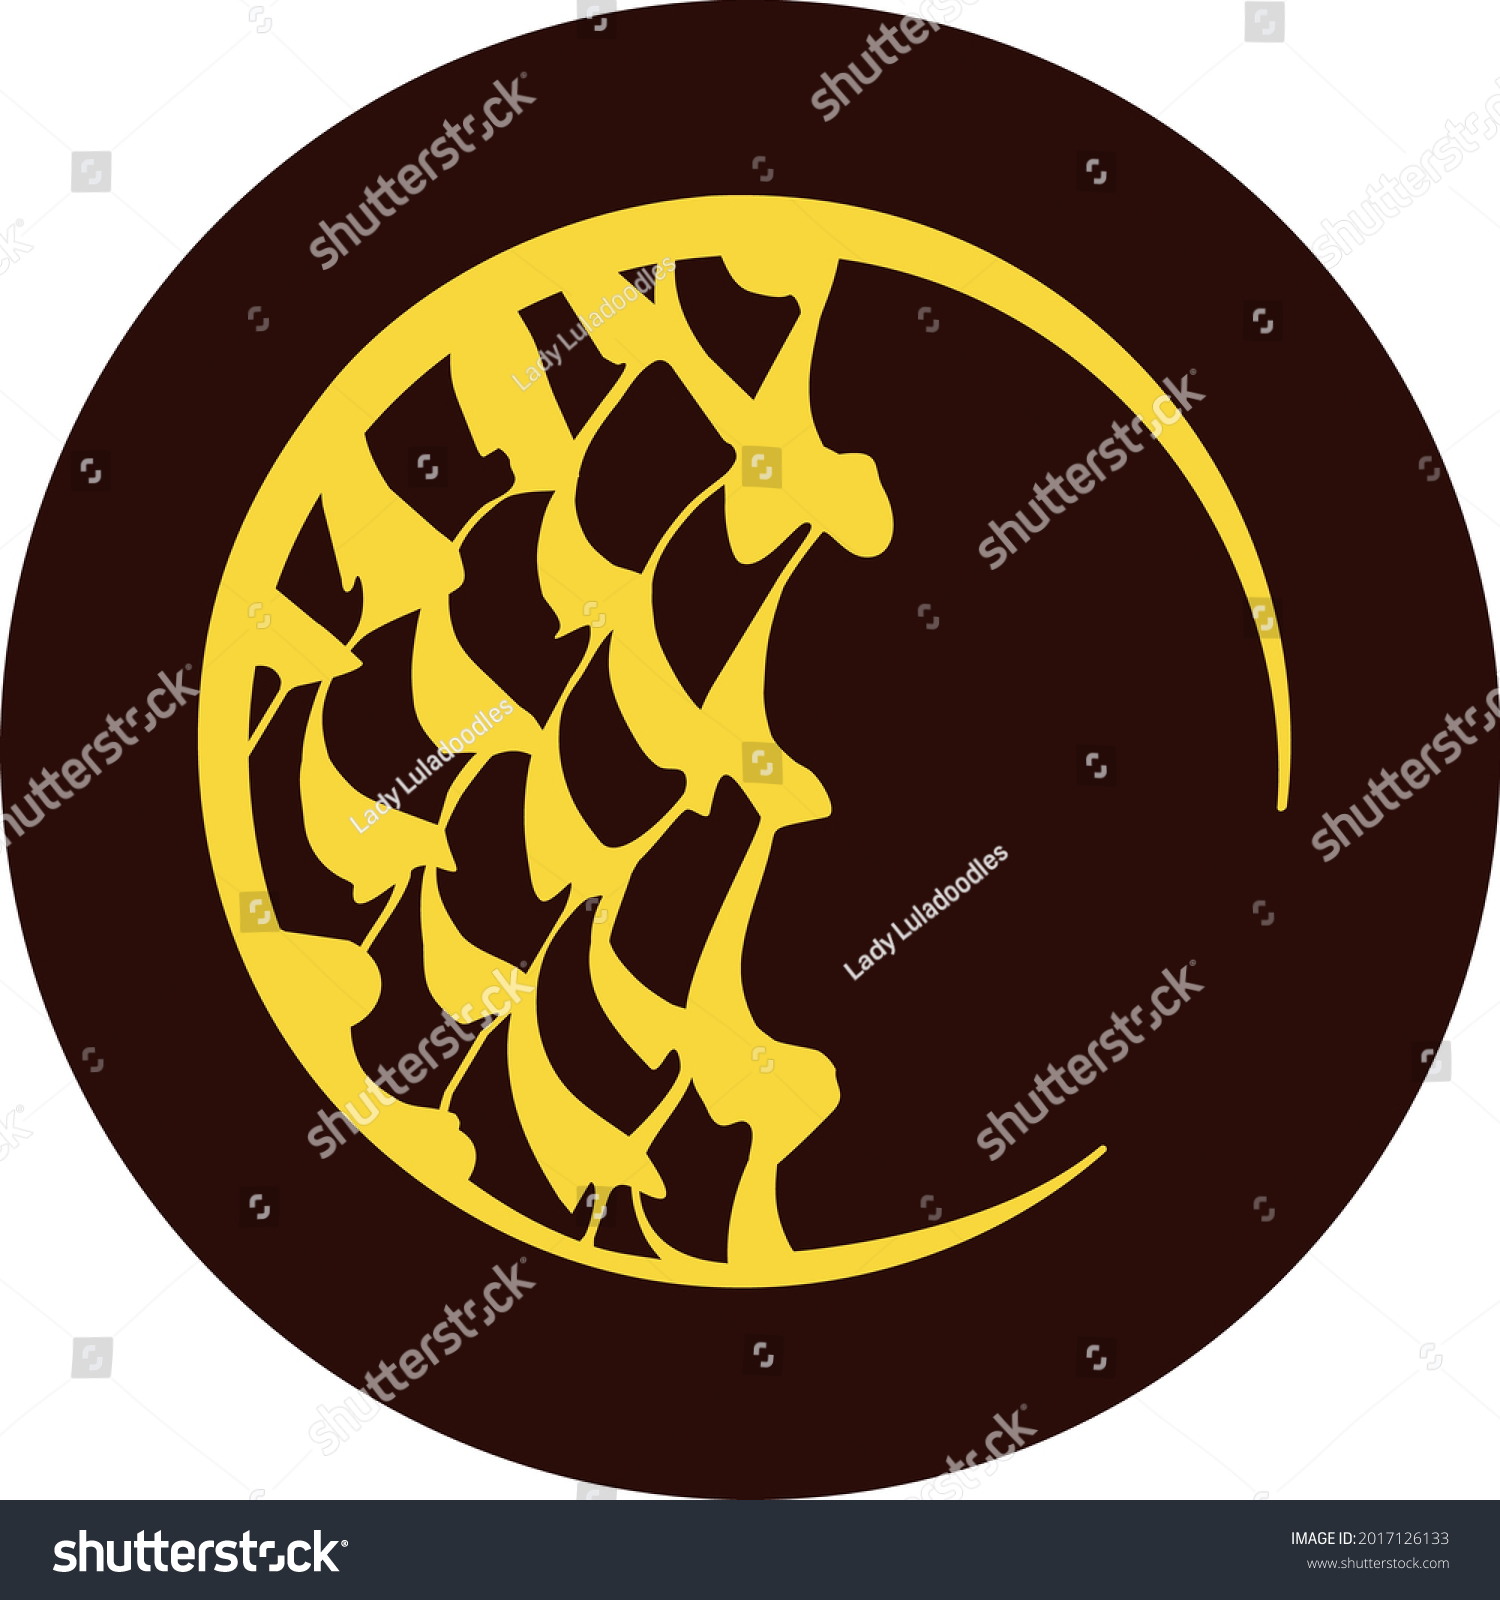 SVG of Dark brown Chocolate candy with golden yellow half moon wave style piped decoration. Layered confectionary SVG svg